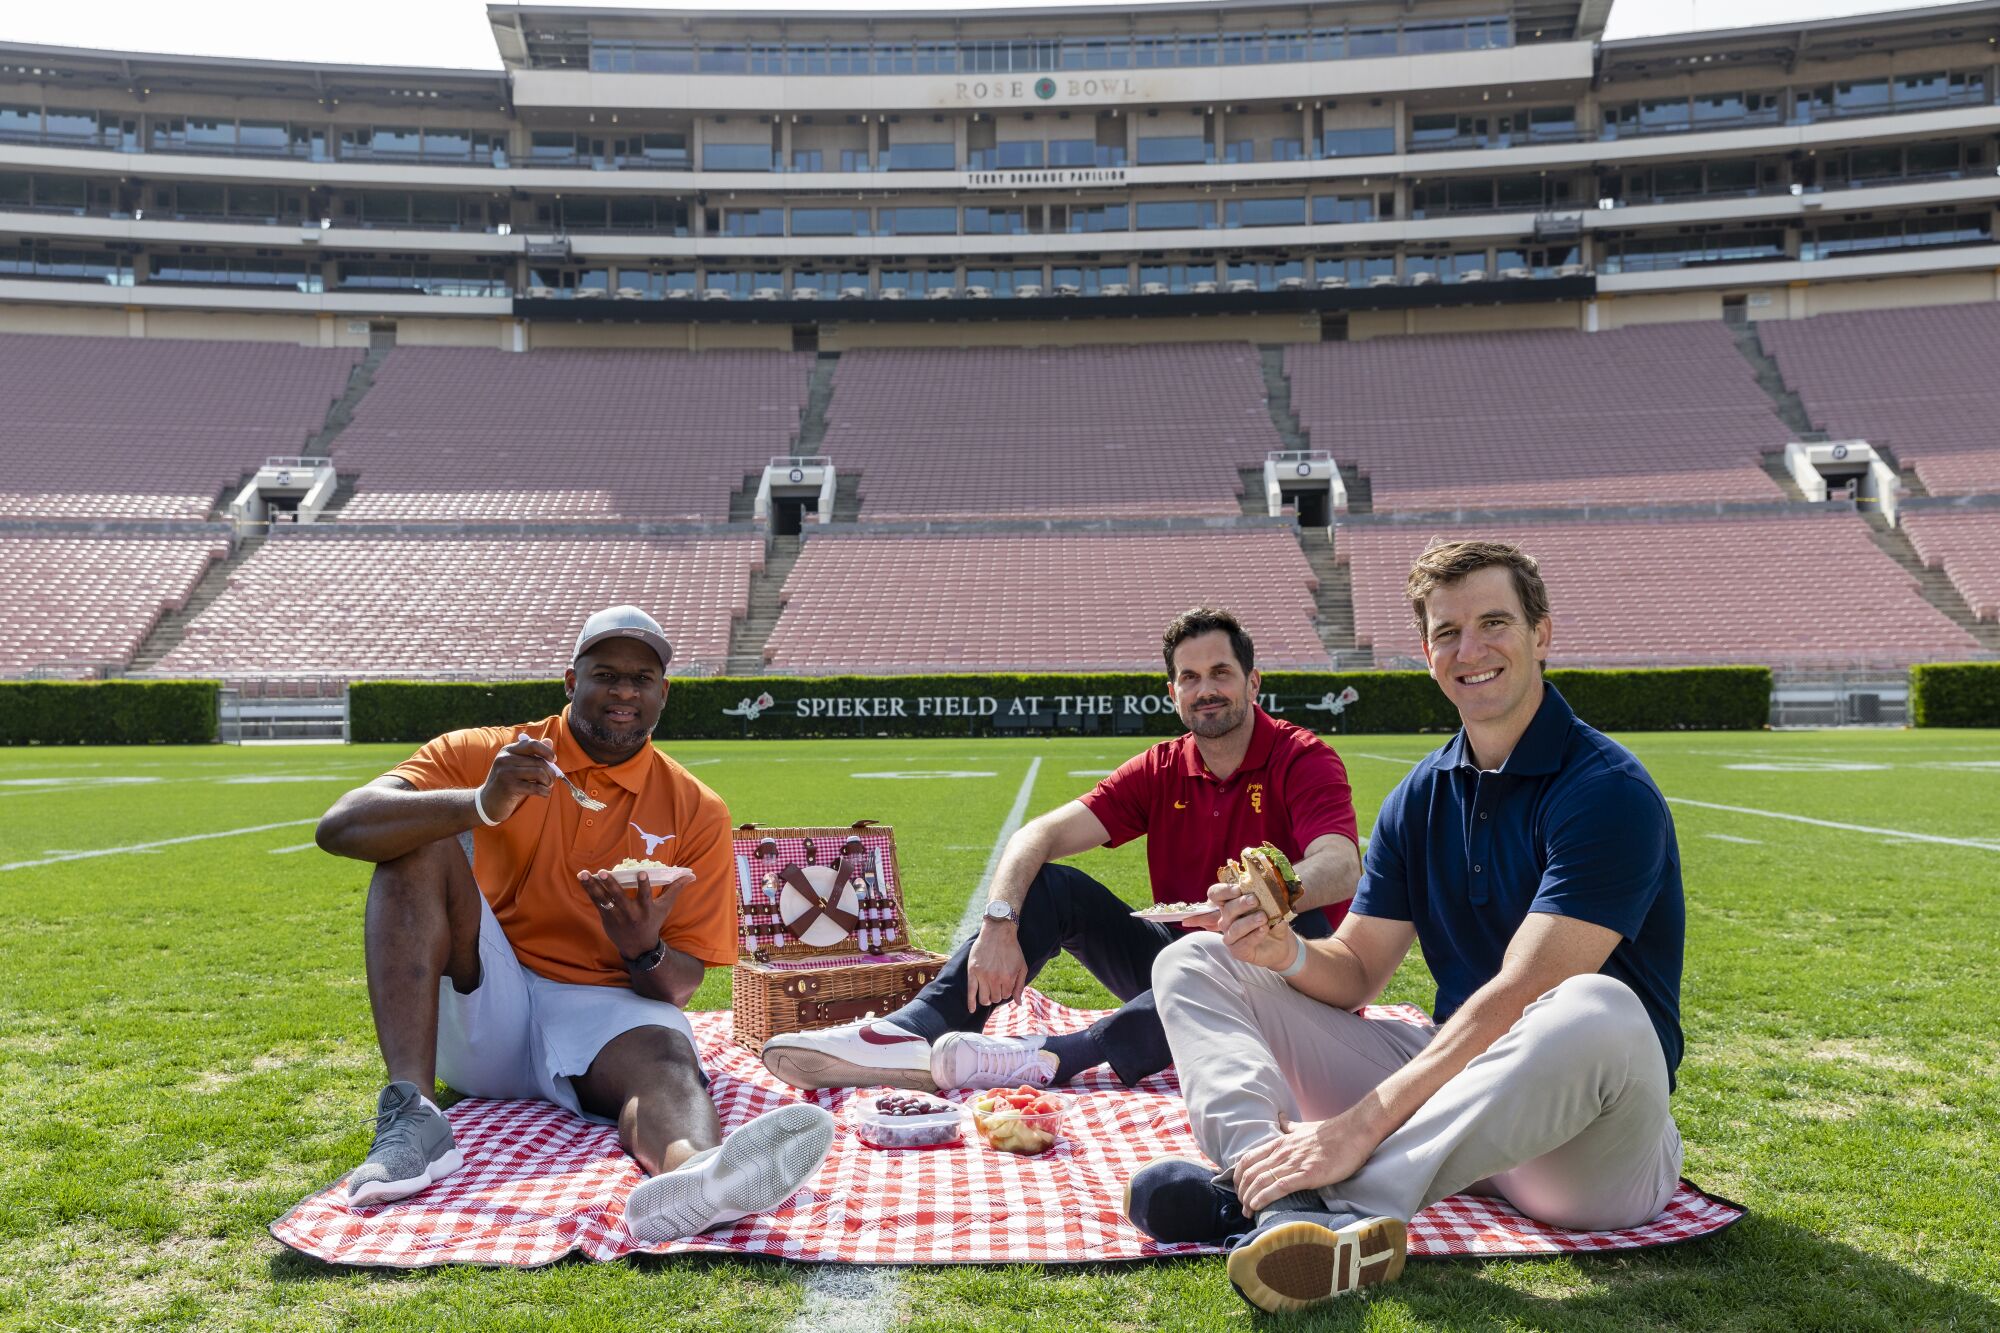 Vince Young, Matt Leinart and Eli Manning have a picnic on the field at the Rose Bowl.